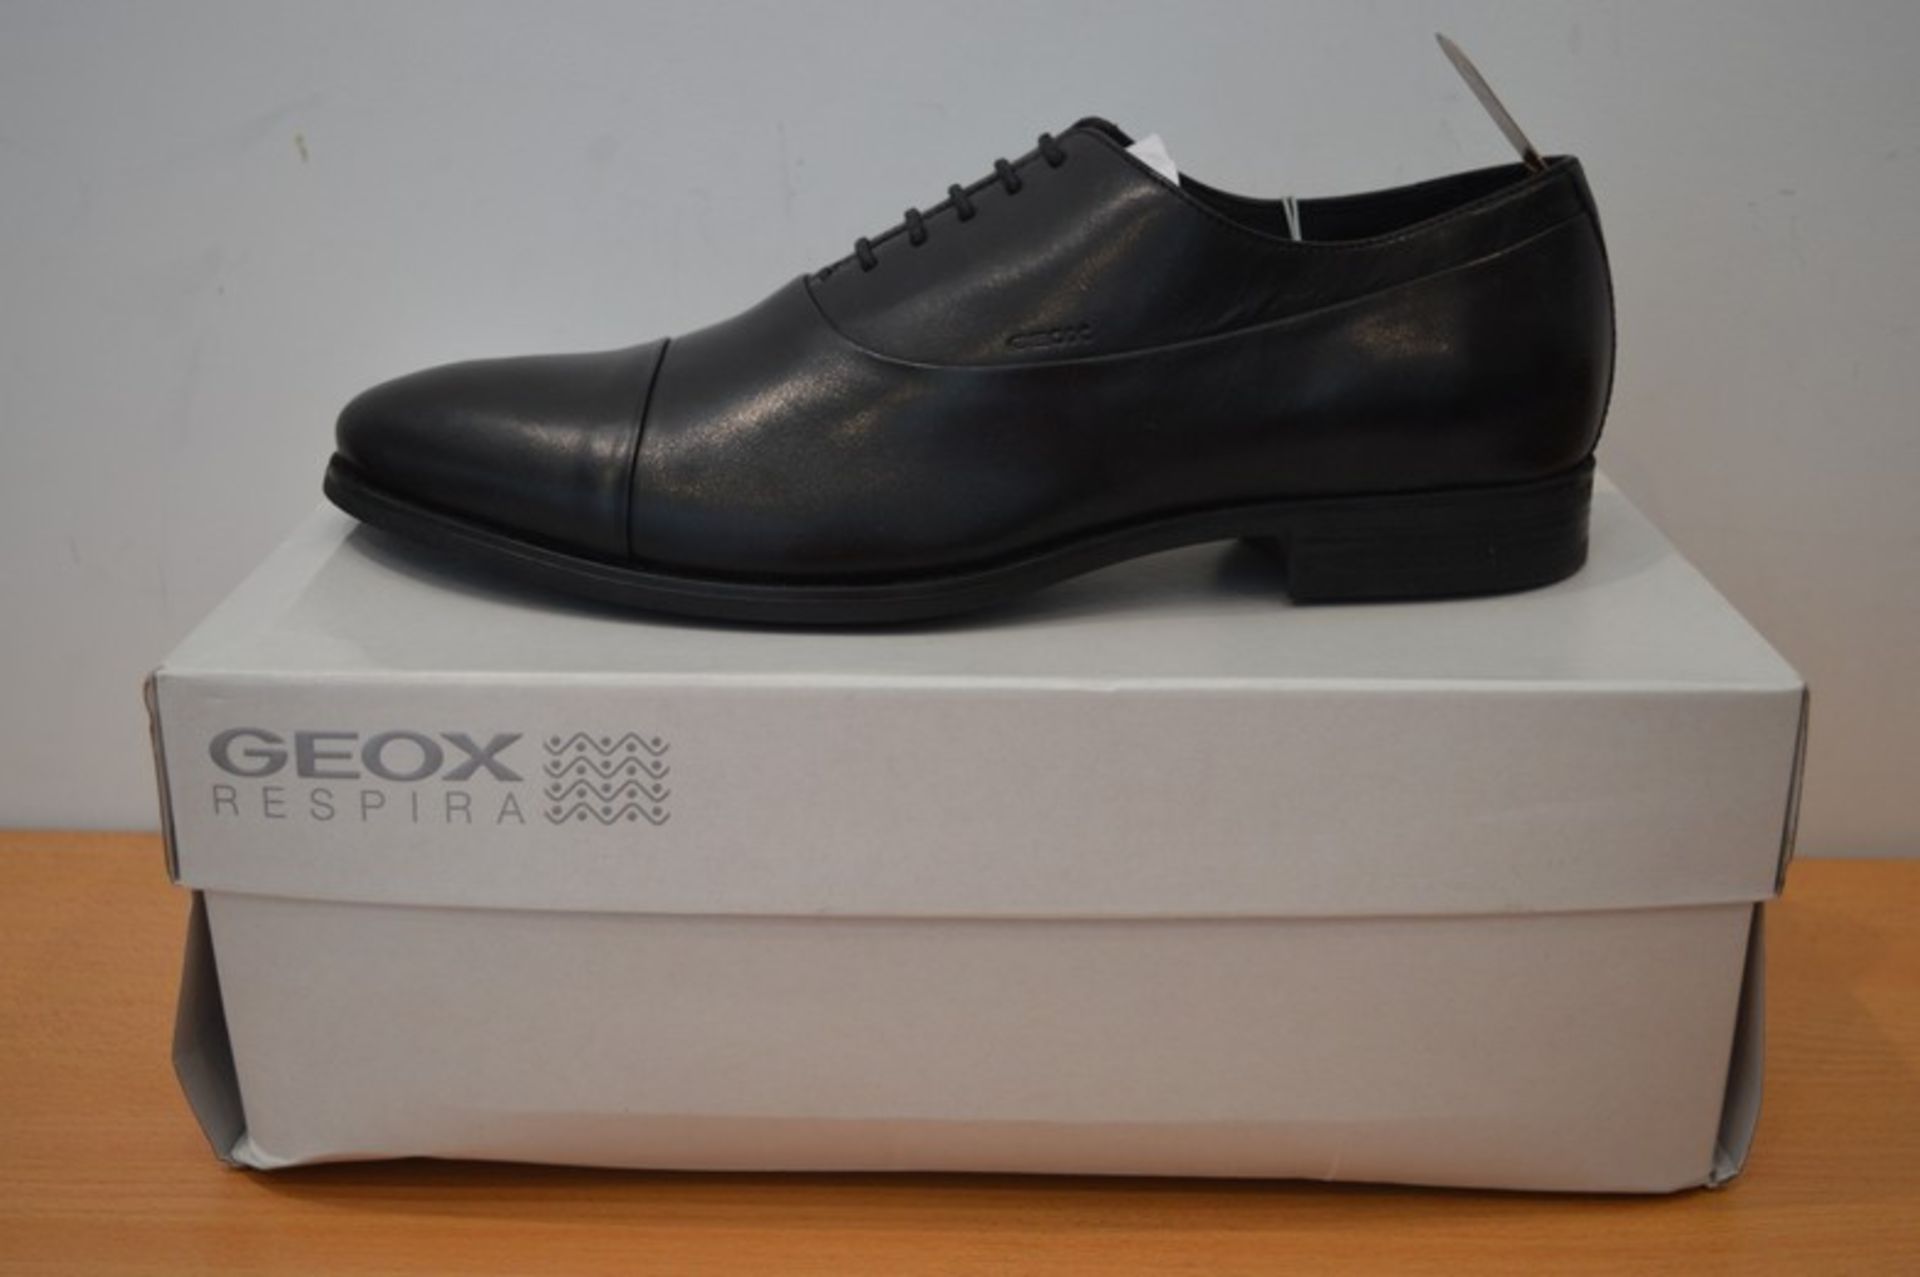 BOXED BRAND NEW GEOX RESPIRA GENTS BLACK LEATHER SHOES SIZE 10 RRP £159 (DSCLIP)(20.05.5)